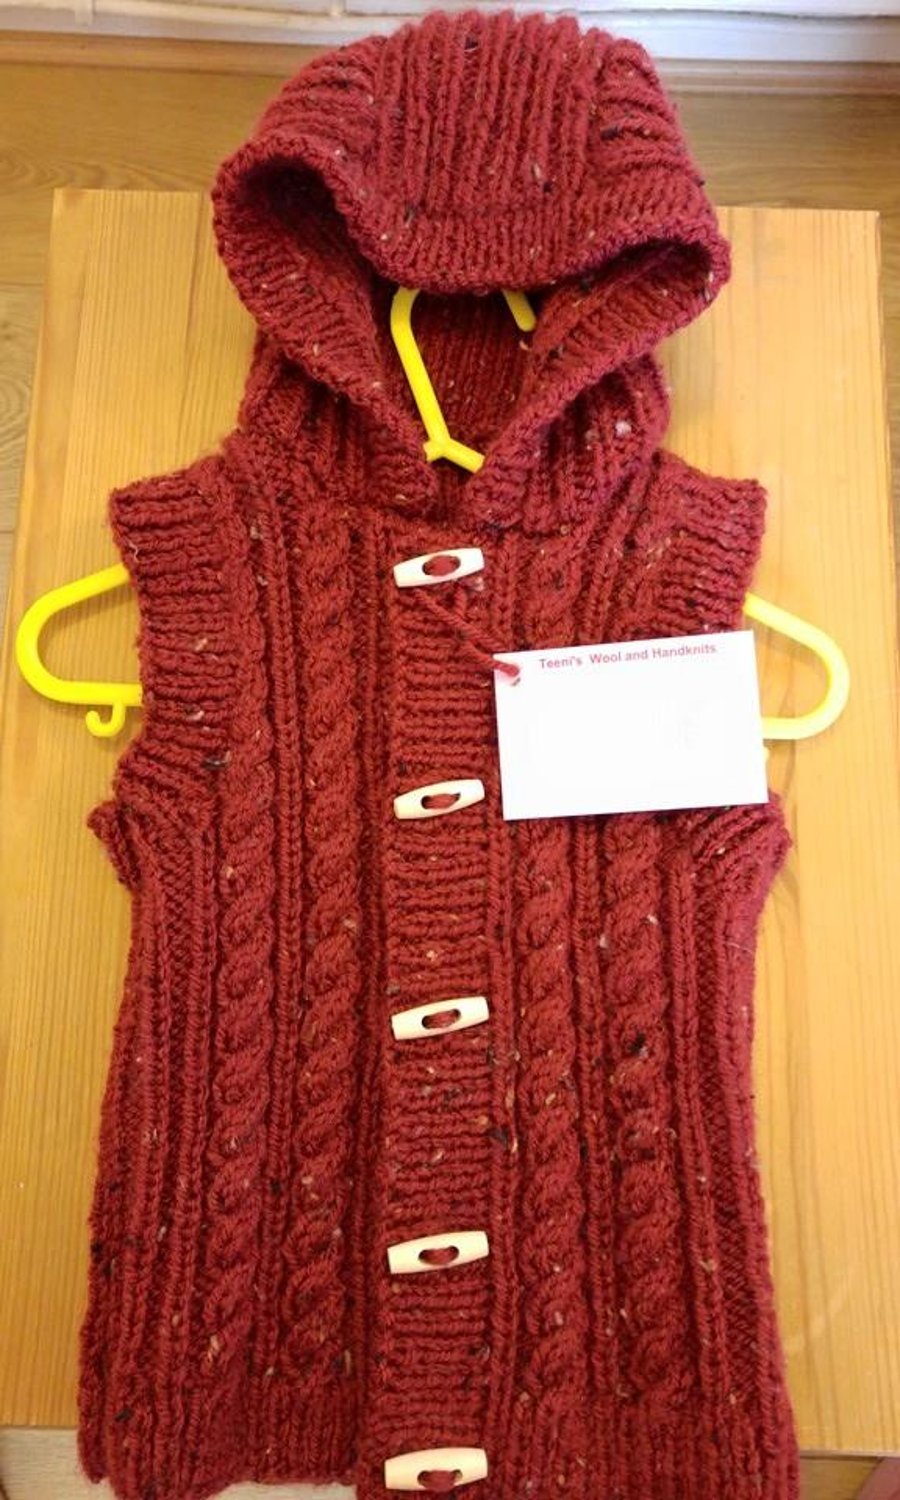 Child's Hooded top